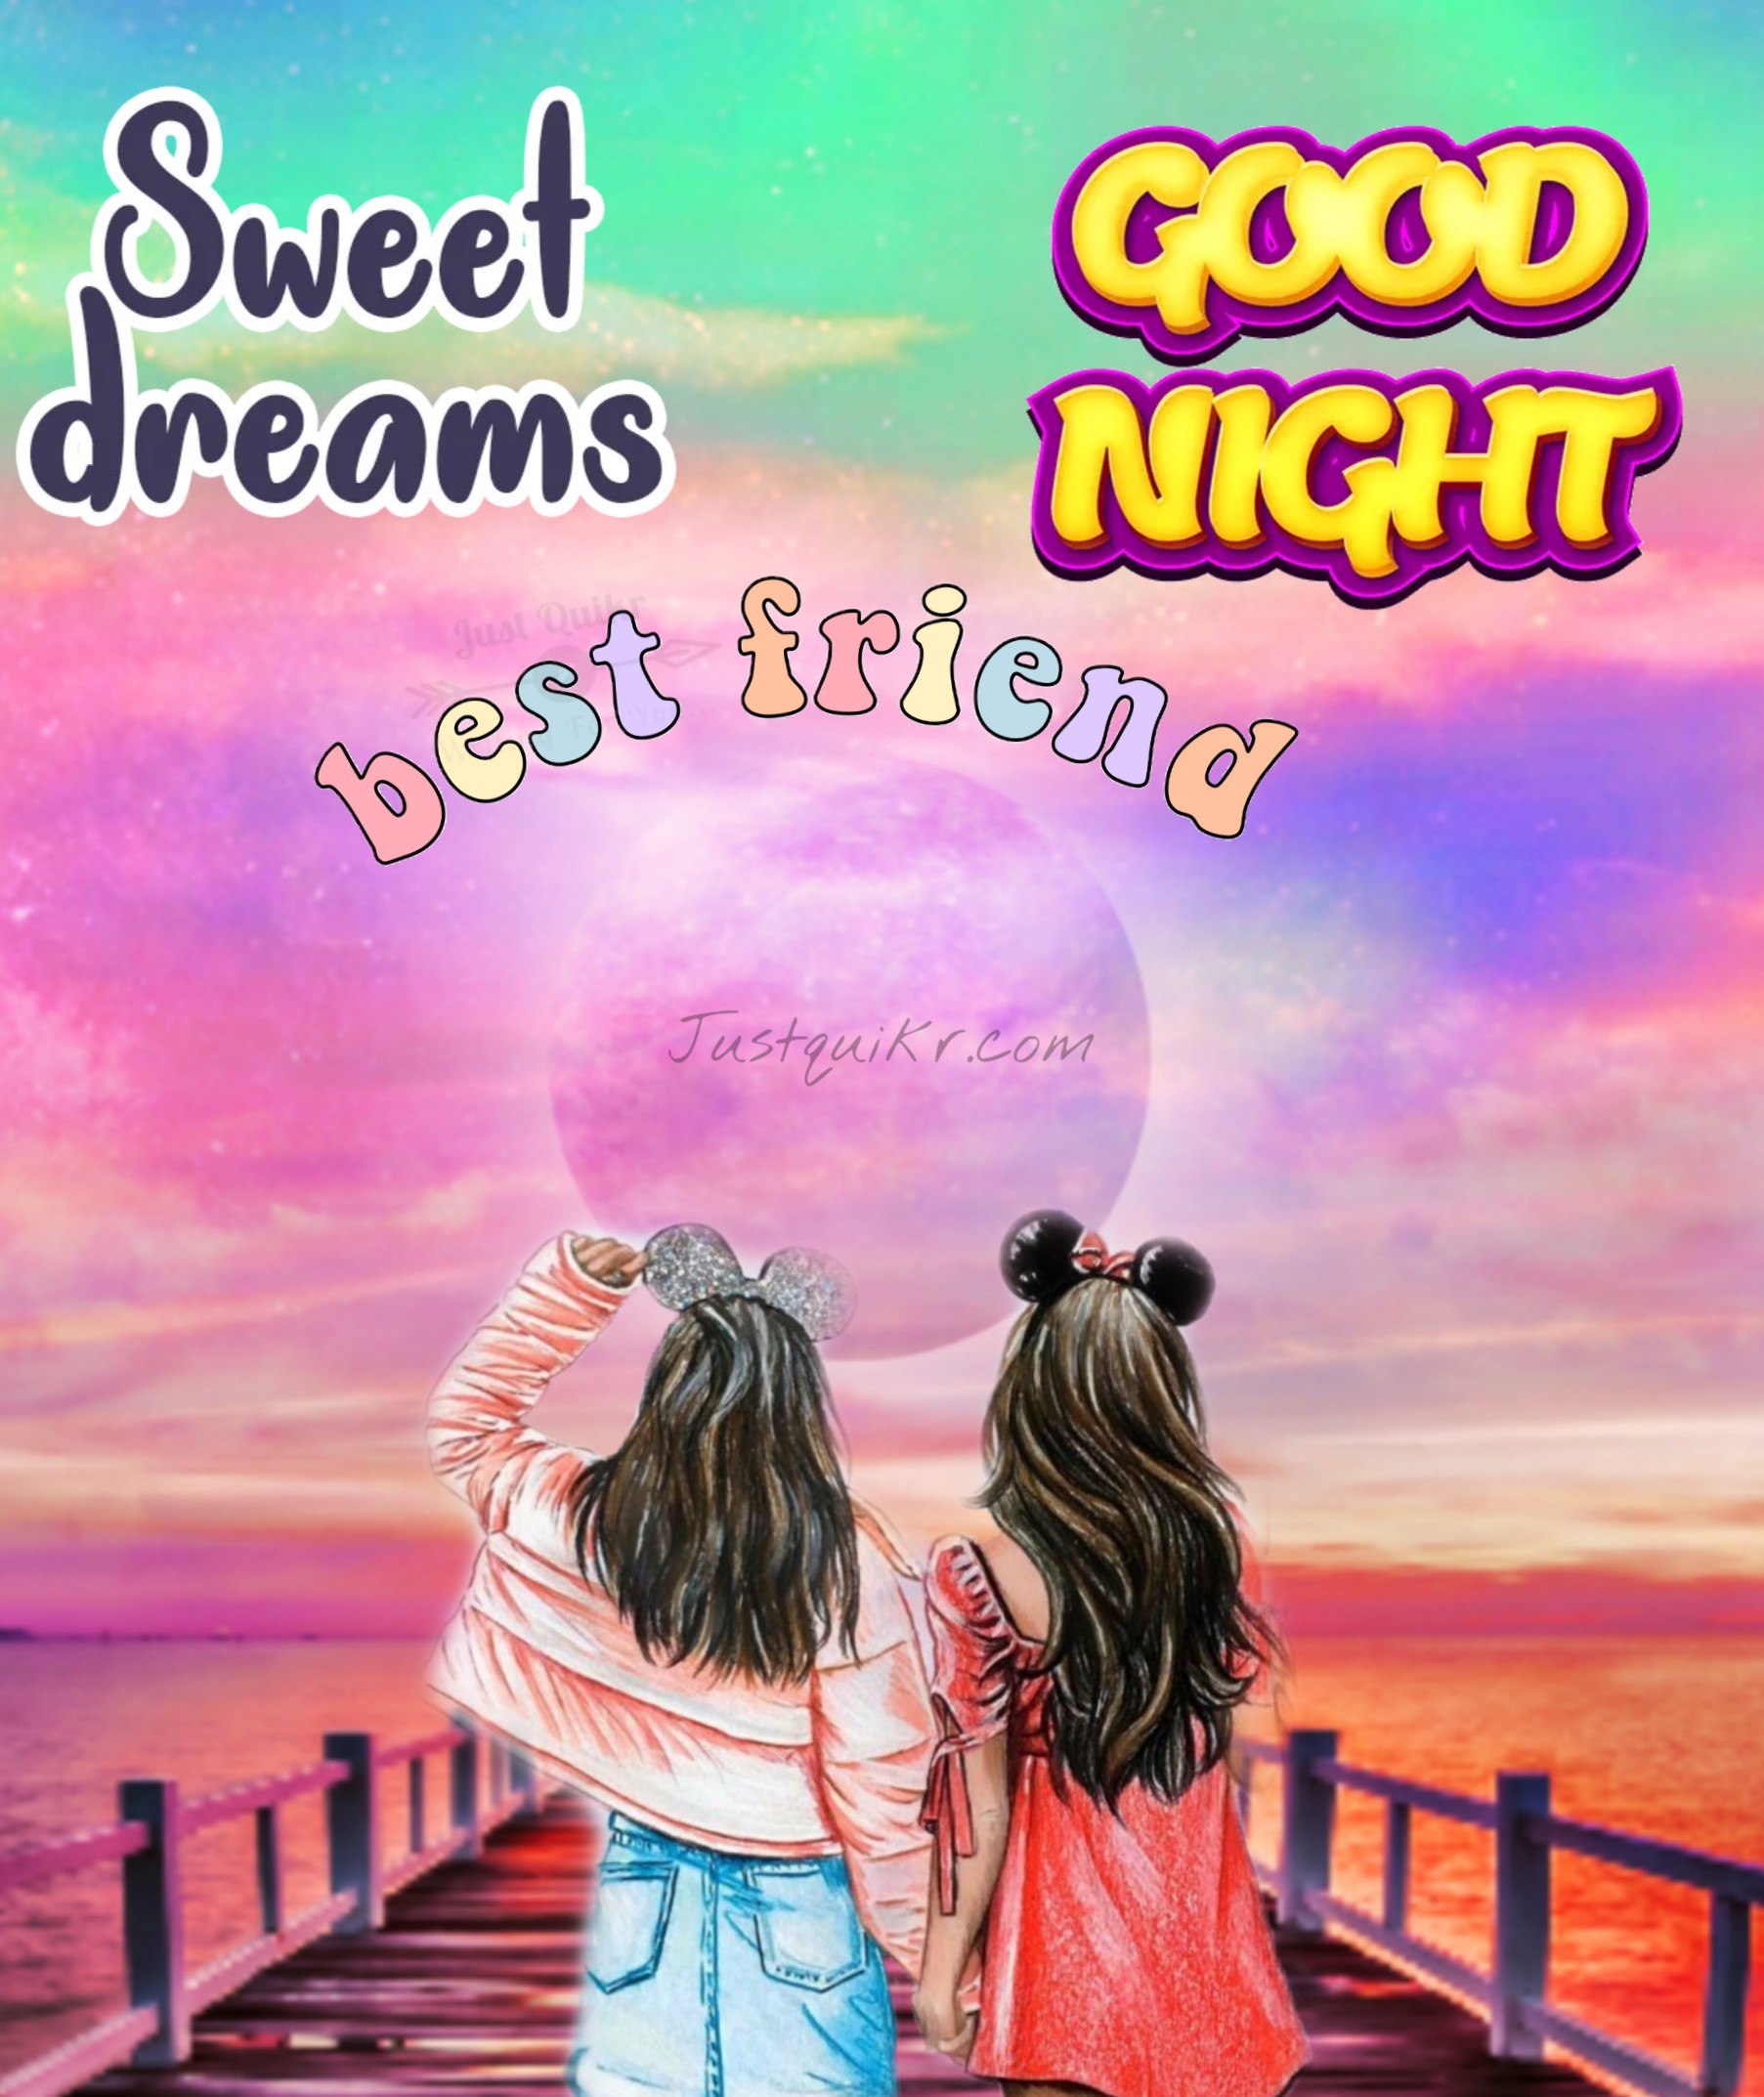 Good Night HD Pics Images For Friends